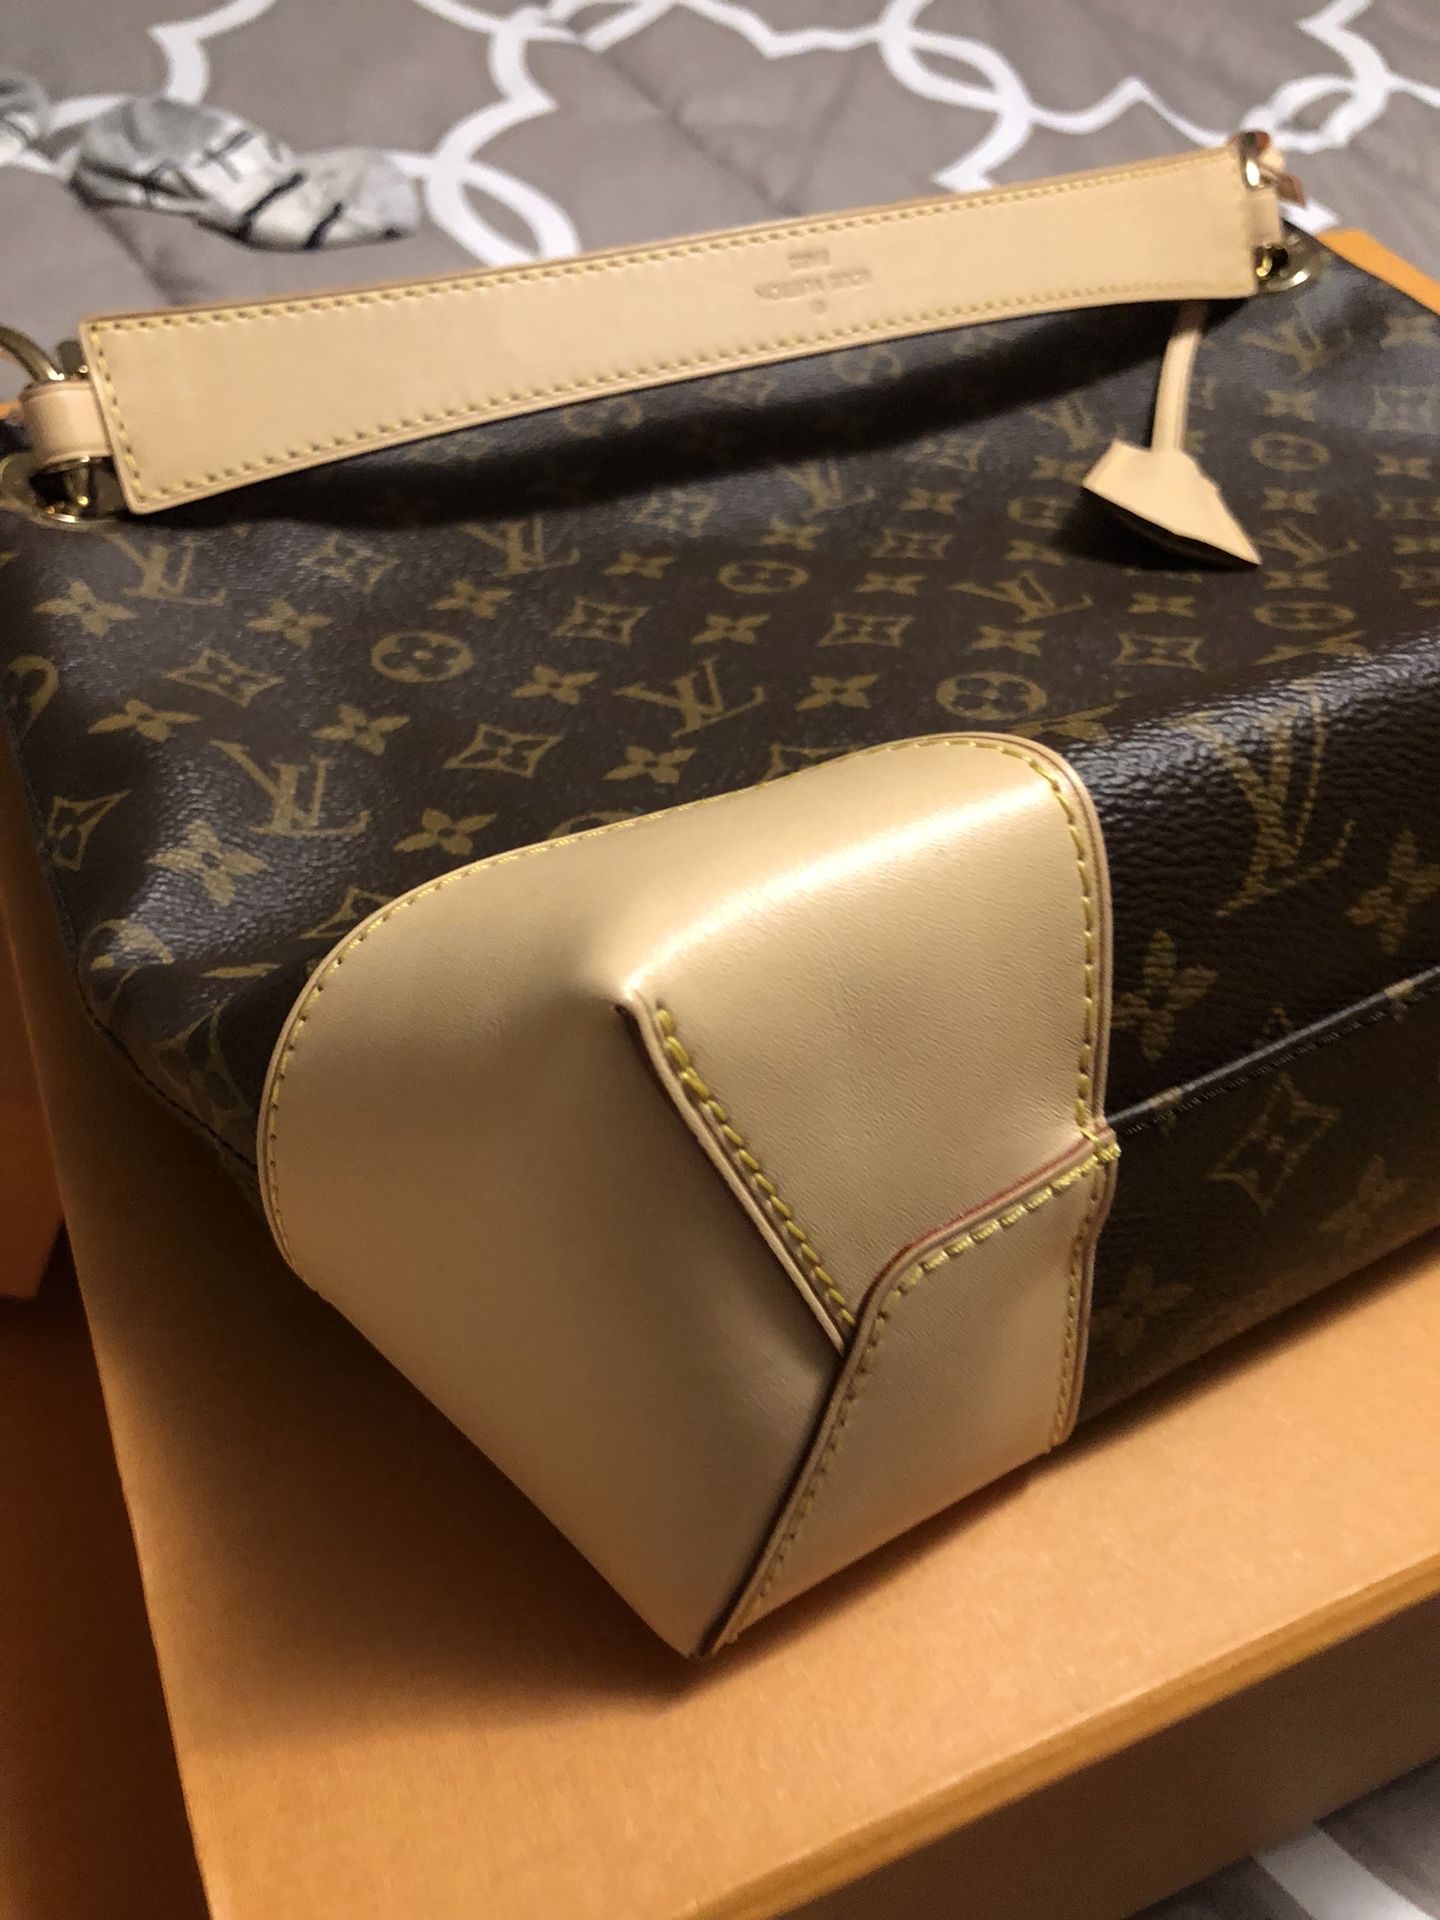 Louis Vuitton berri pm for Sale in East Providence, RI - OfferUp